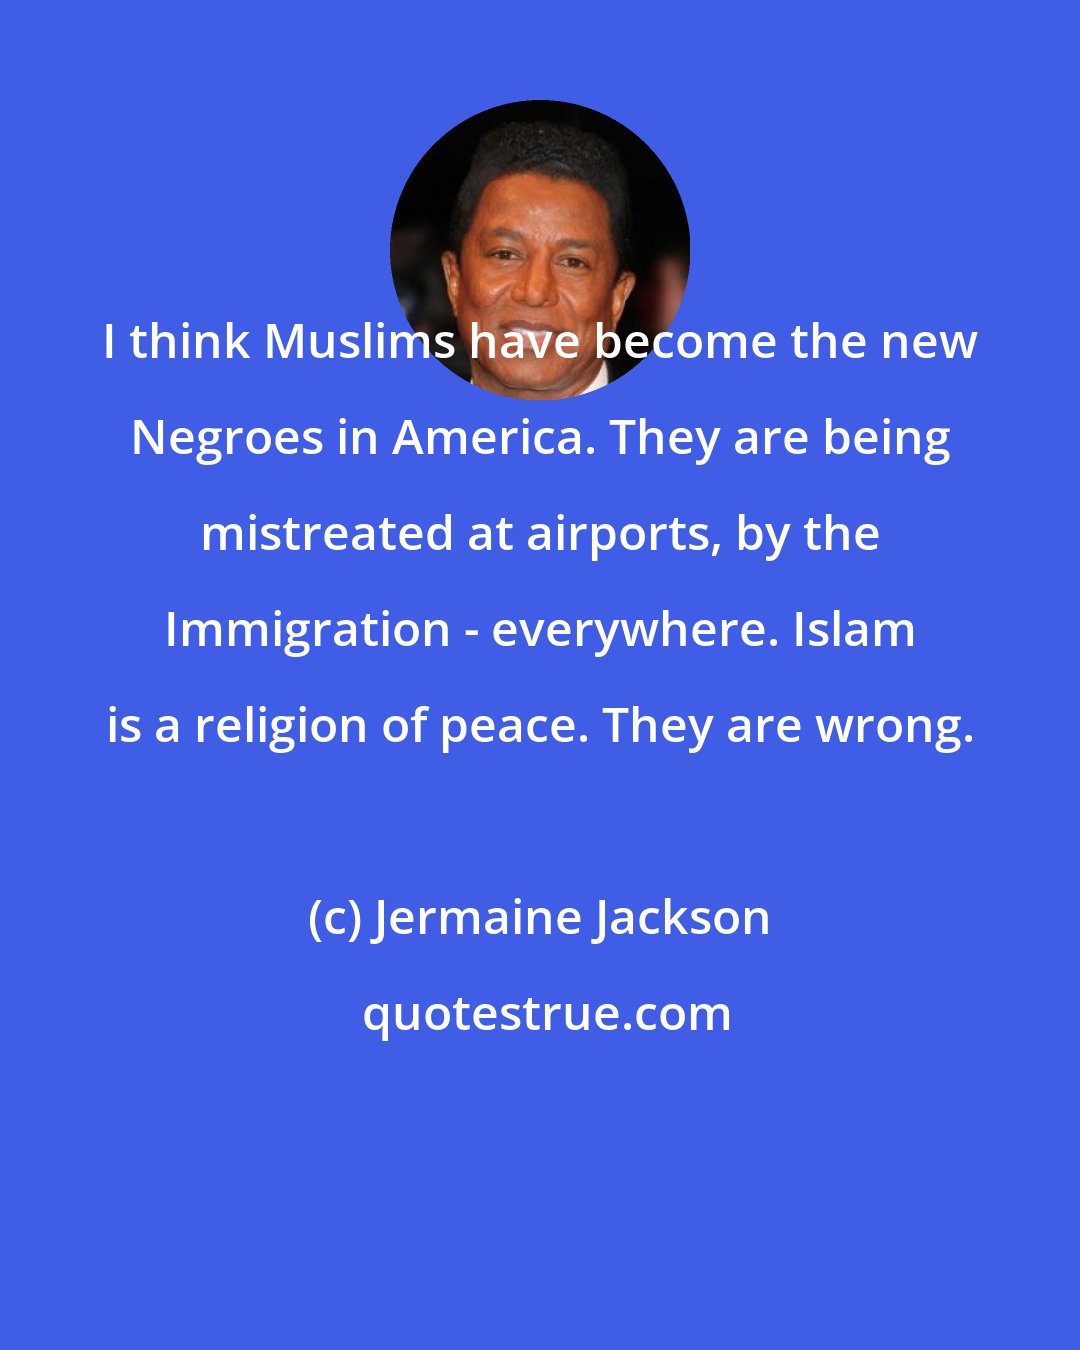 Jermaine Jackson: I think Muslims have become the new Negroes in America. They are being mistreated at airports, by the Immigration - everywhere. Islam is a religion of peace. They are wrong.